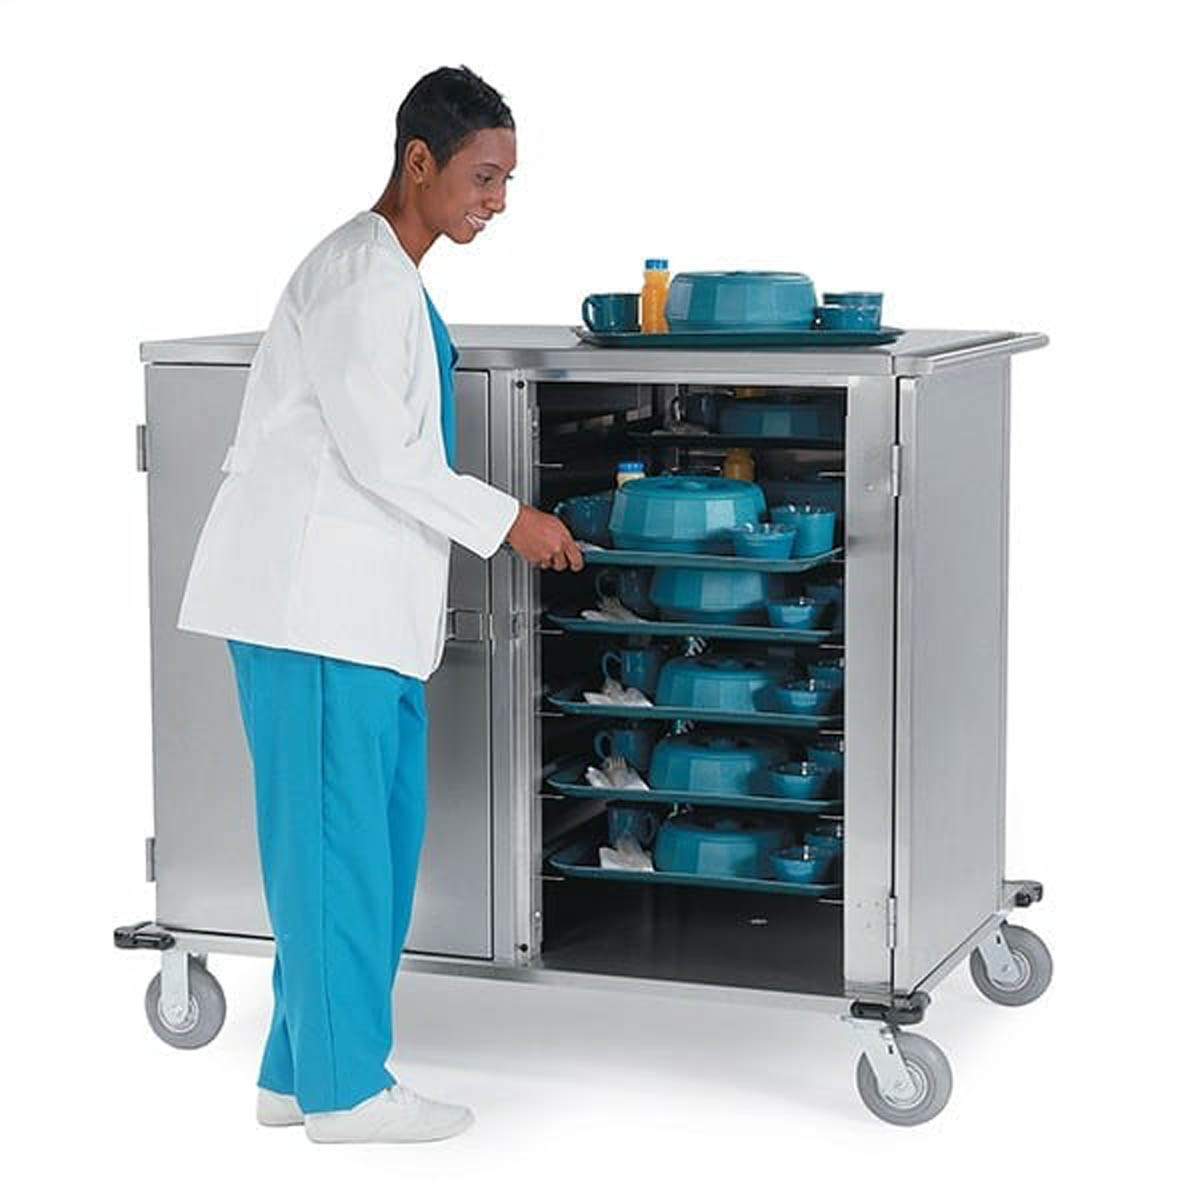 Lakeside 5632 Elite Series Meal Delivery Tray Cart, 32 Tray Capacity